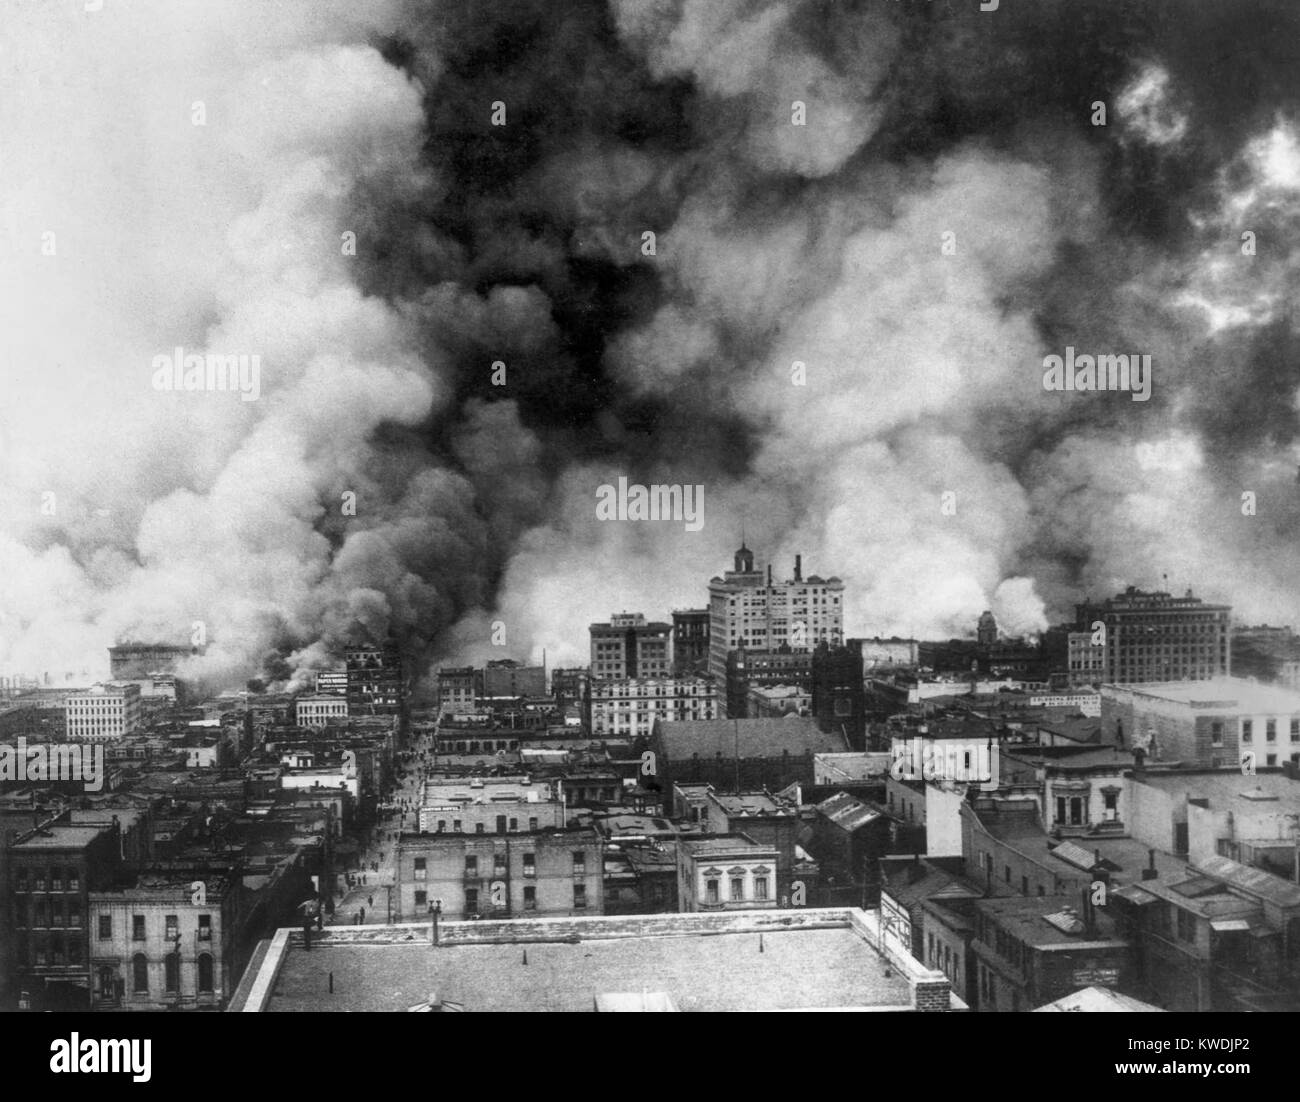 San Francisco in flames after April 18, 1906 earthquake. View includes the area east of Sansome Street, north of Bush Street, south of Jackson Street, and west of Embarcadero Street. The unburned area shown here is the Chinatown District, which would also be engulfed (BSLOC 2017 17 15) Stock Photo